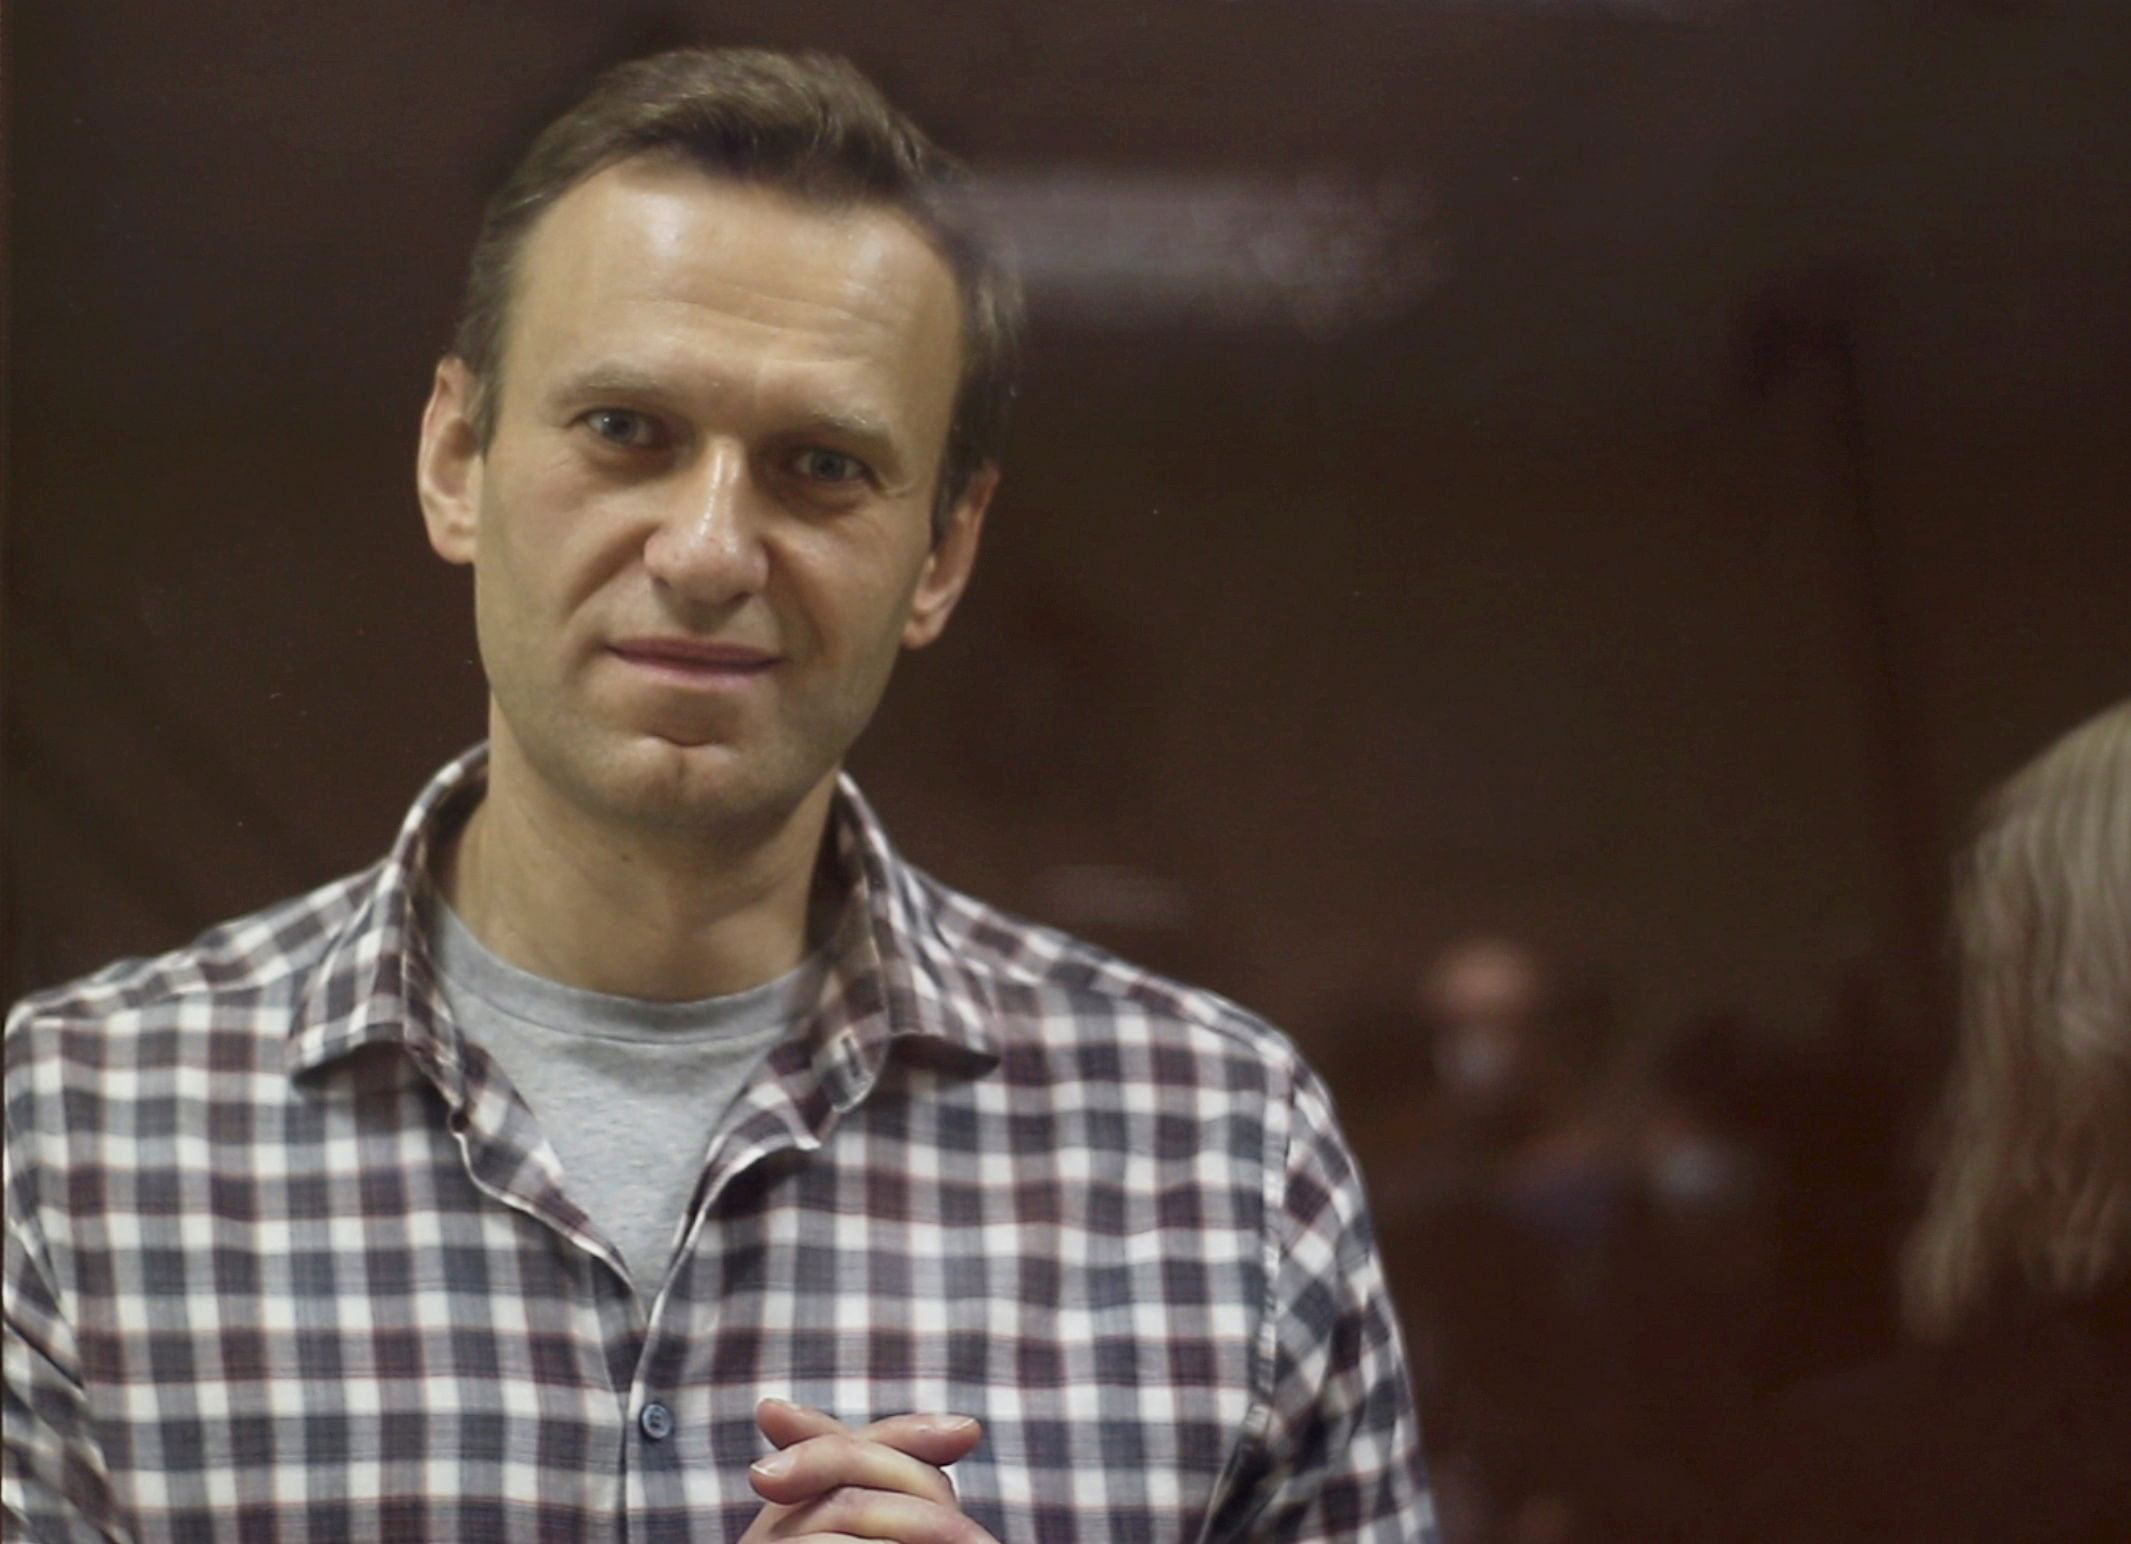  Kremlin critic Alexei Navalny, who is accused of slandering a Russian World War Two veteran, stands inside a defendant dock during a court hearing in Moscow, Russia, Russia February 20, 2021, in this still image taken from video. Credit: Babushkinsky District Court of Moscow/Handout via REUTERS